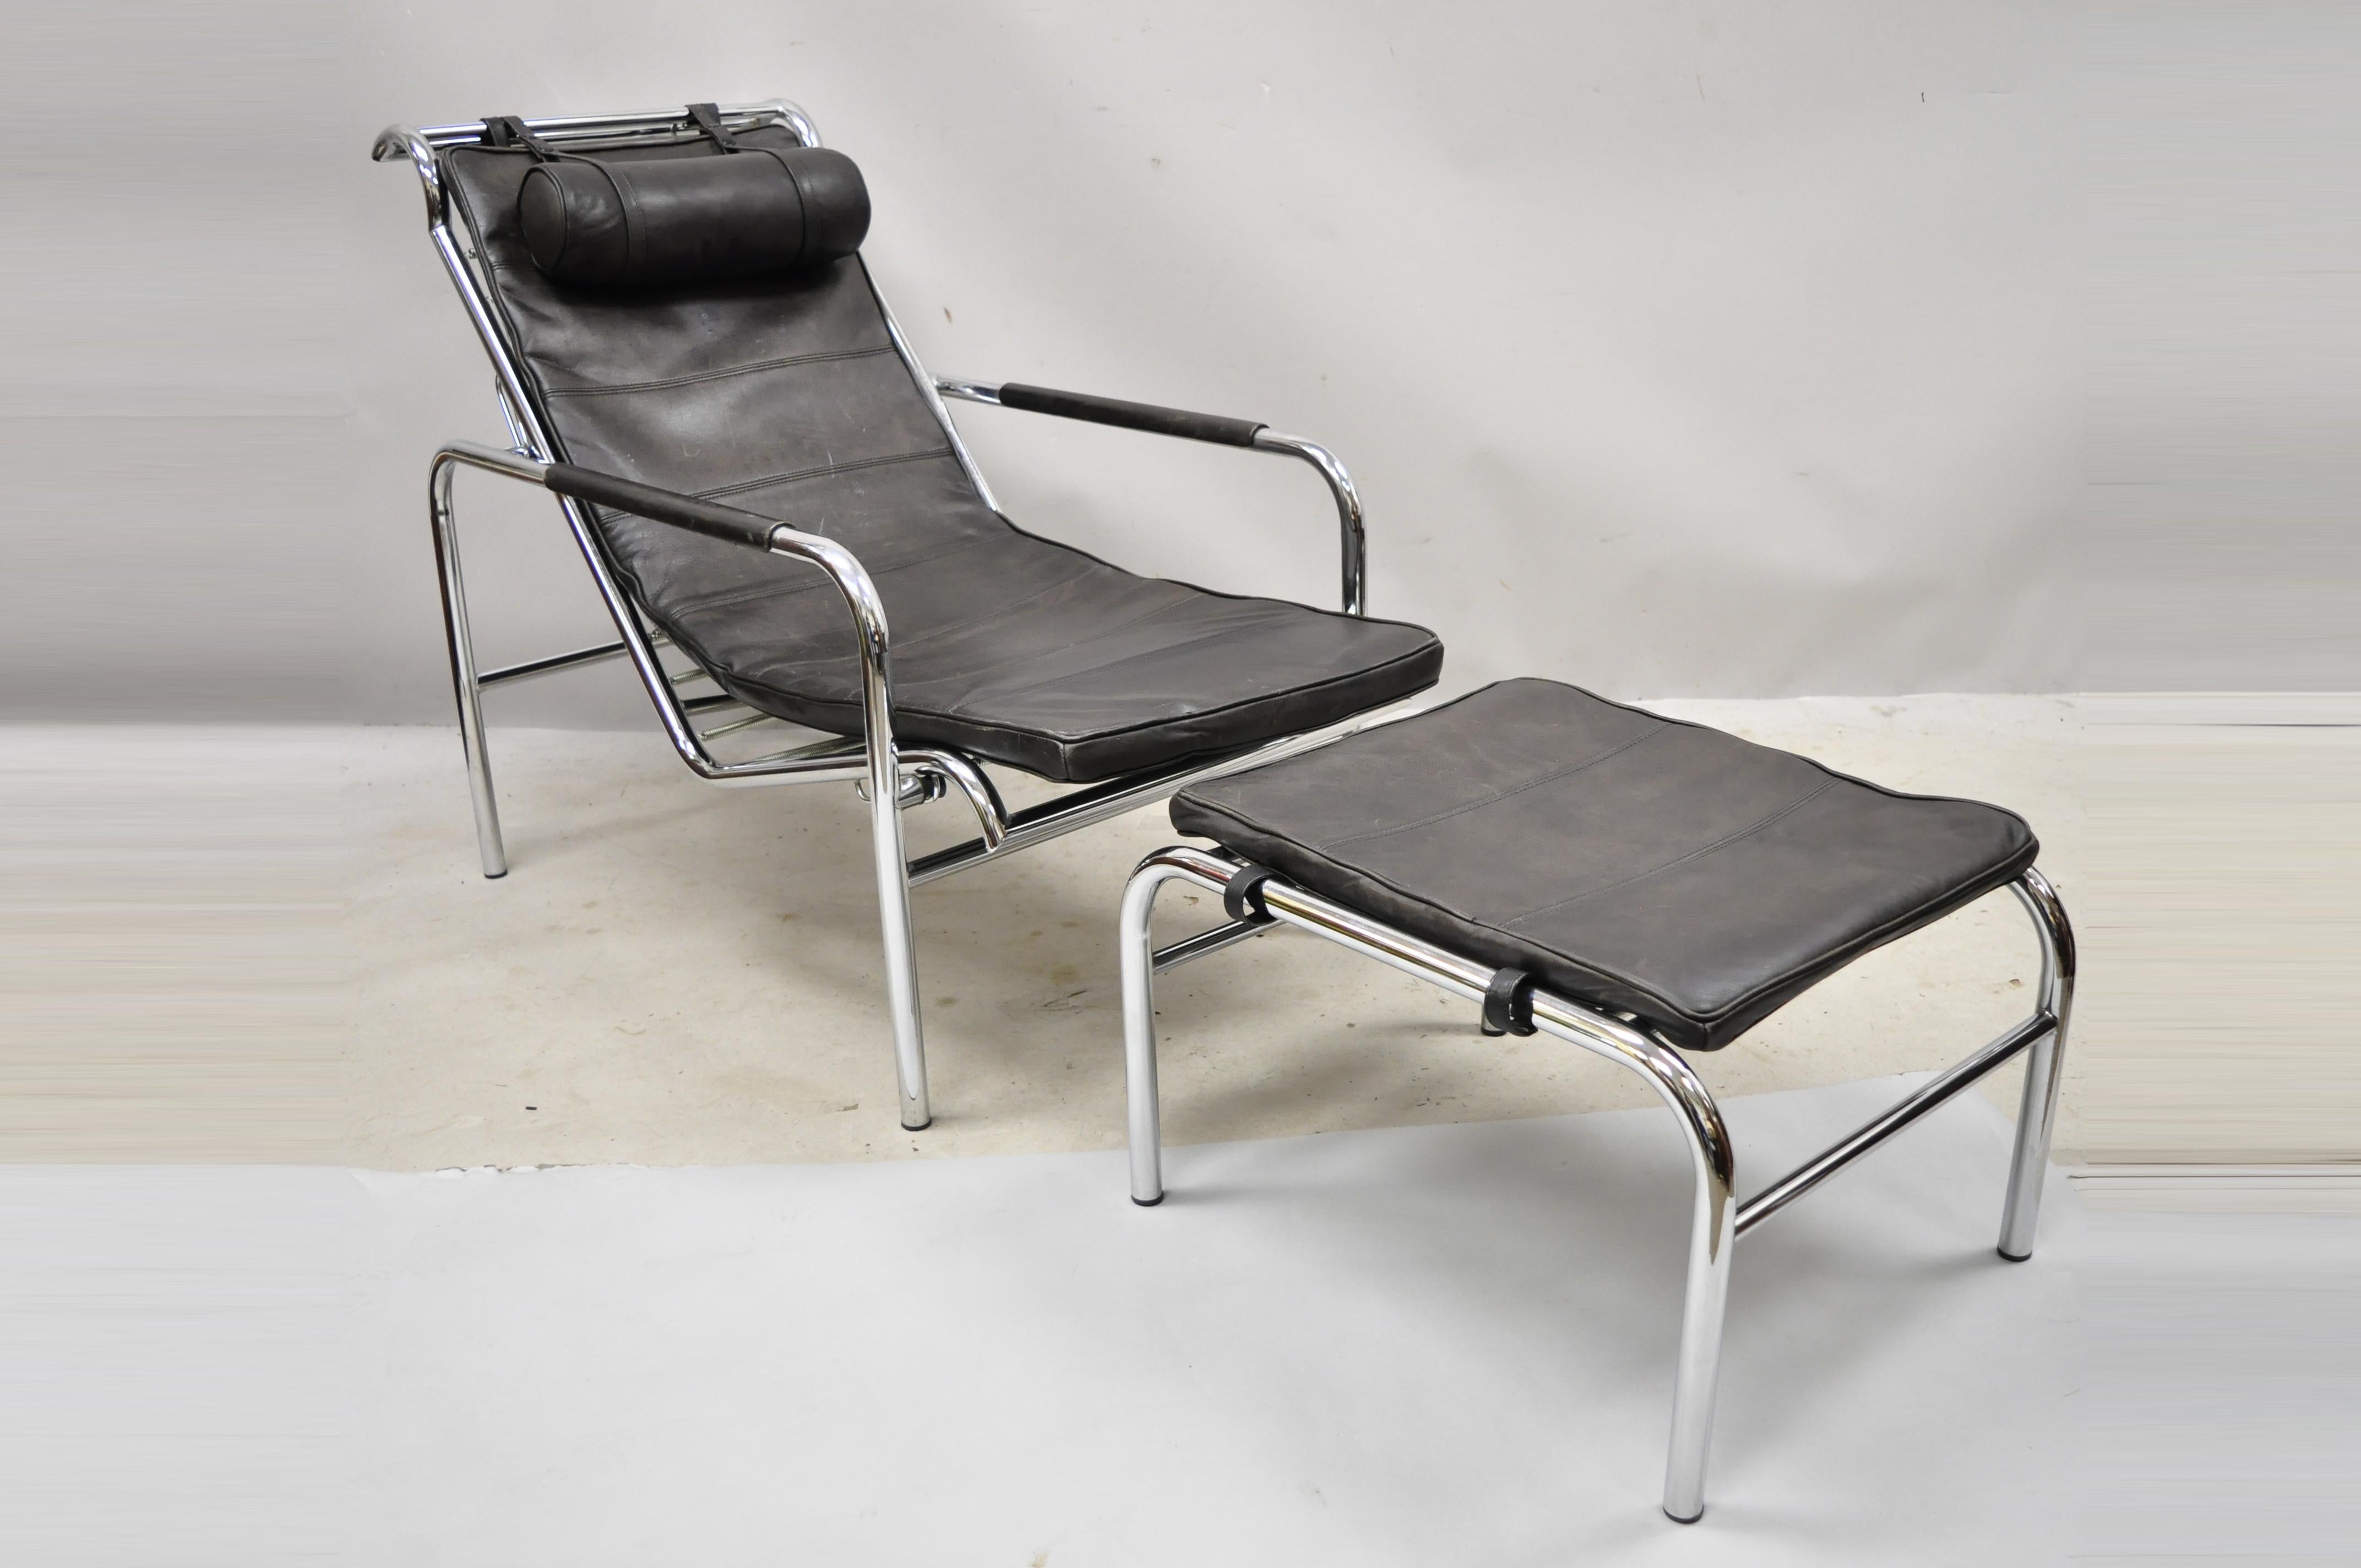 Vintage mid century Italian Modern Gabriele Mucchi for Zanotta Genni brown leather chrome lounge chair and ottoman. Item features chrome reclining frame, leather cushions, original label, quality Italian craftsmanship, sleek sculptural form. Circa